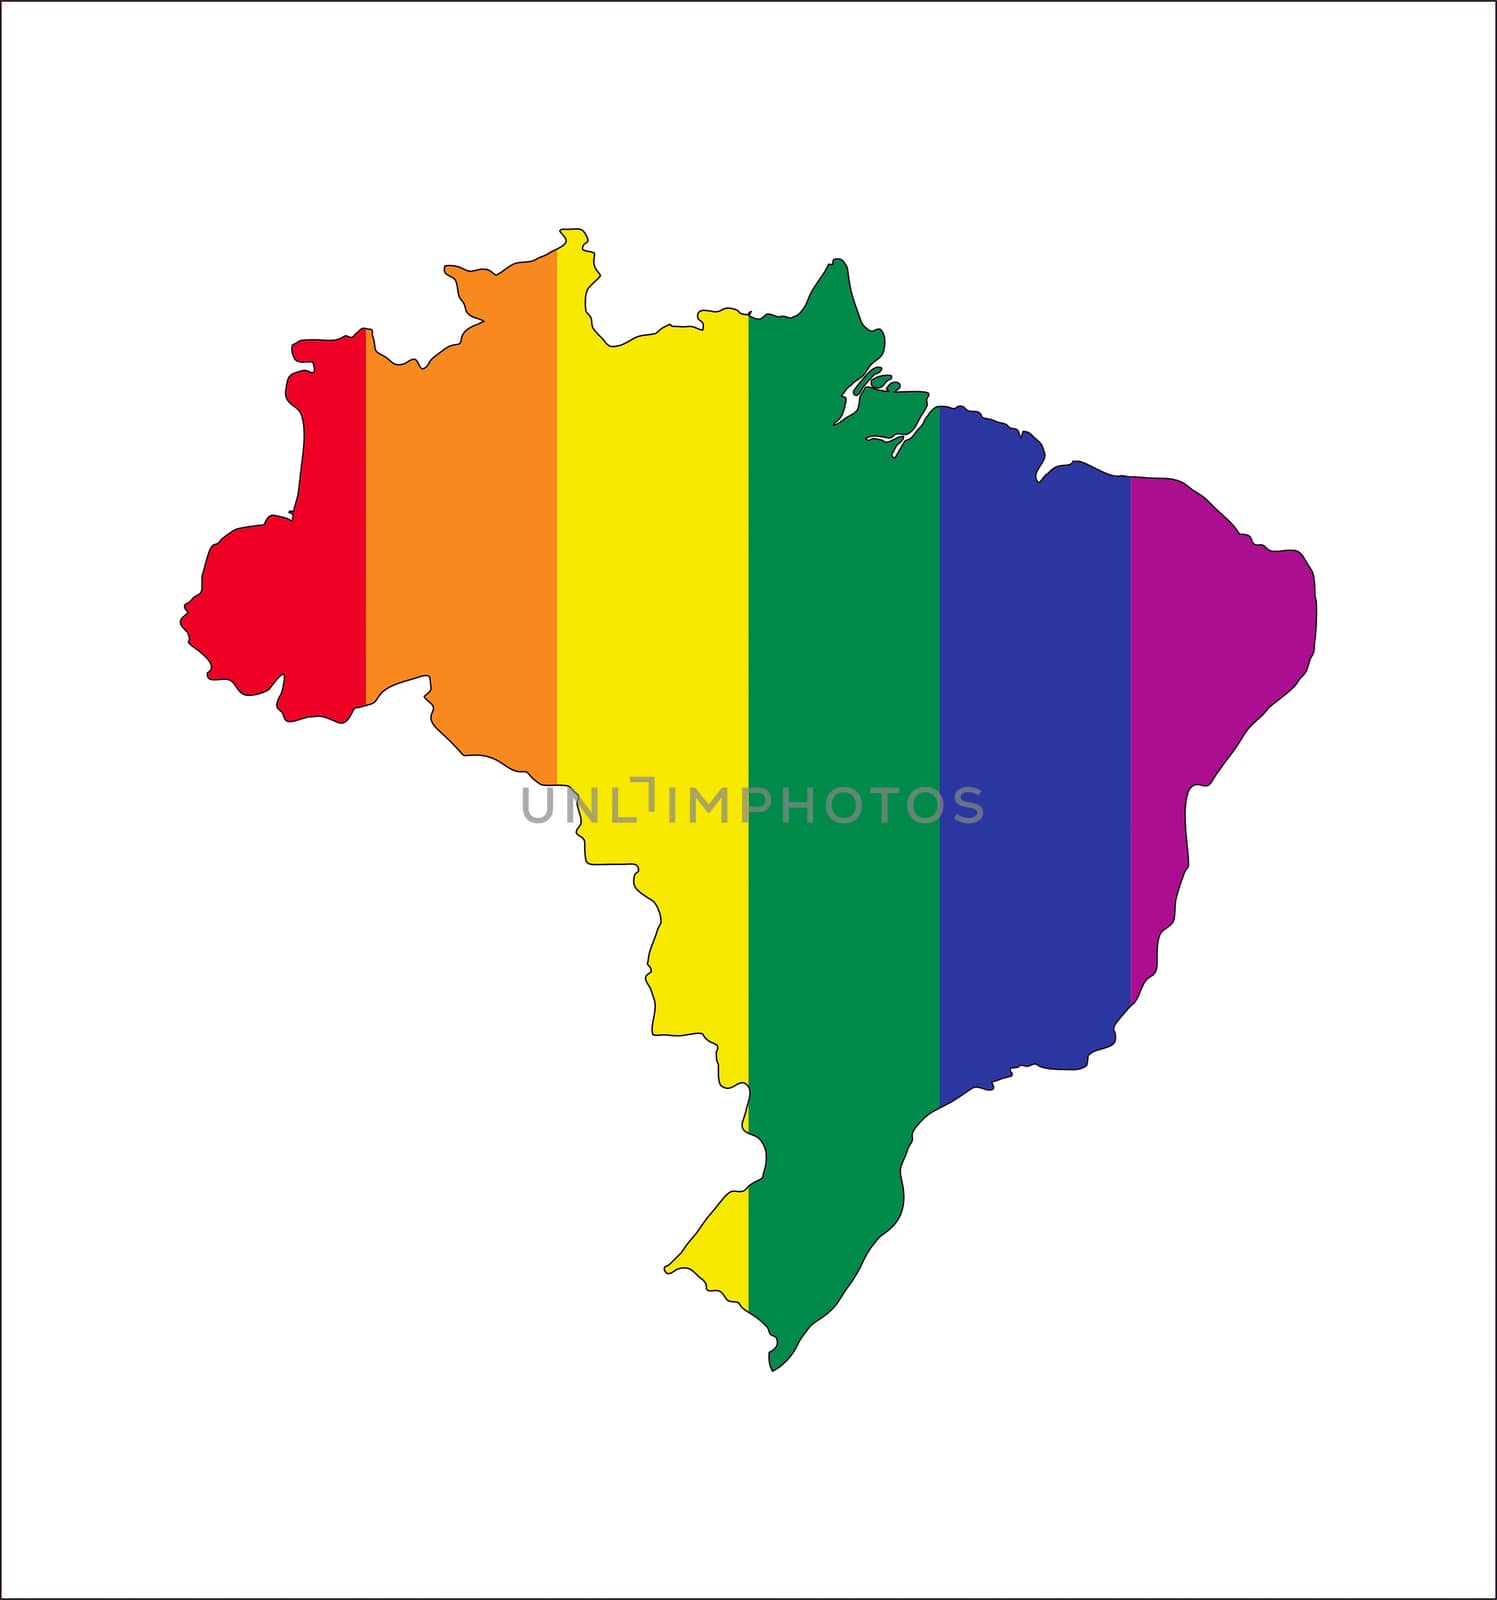 brazil country gay pride flag map shape 